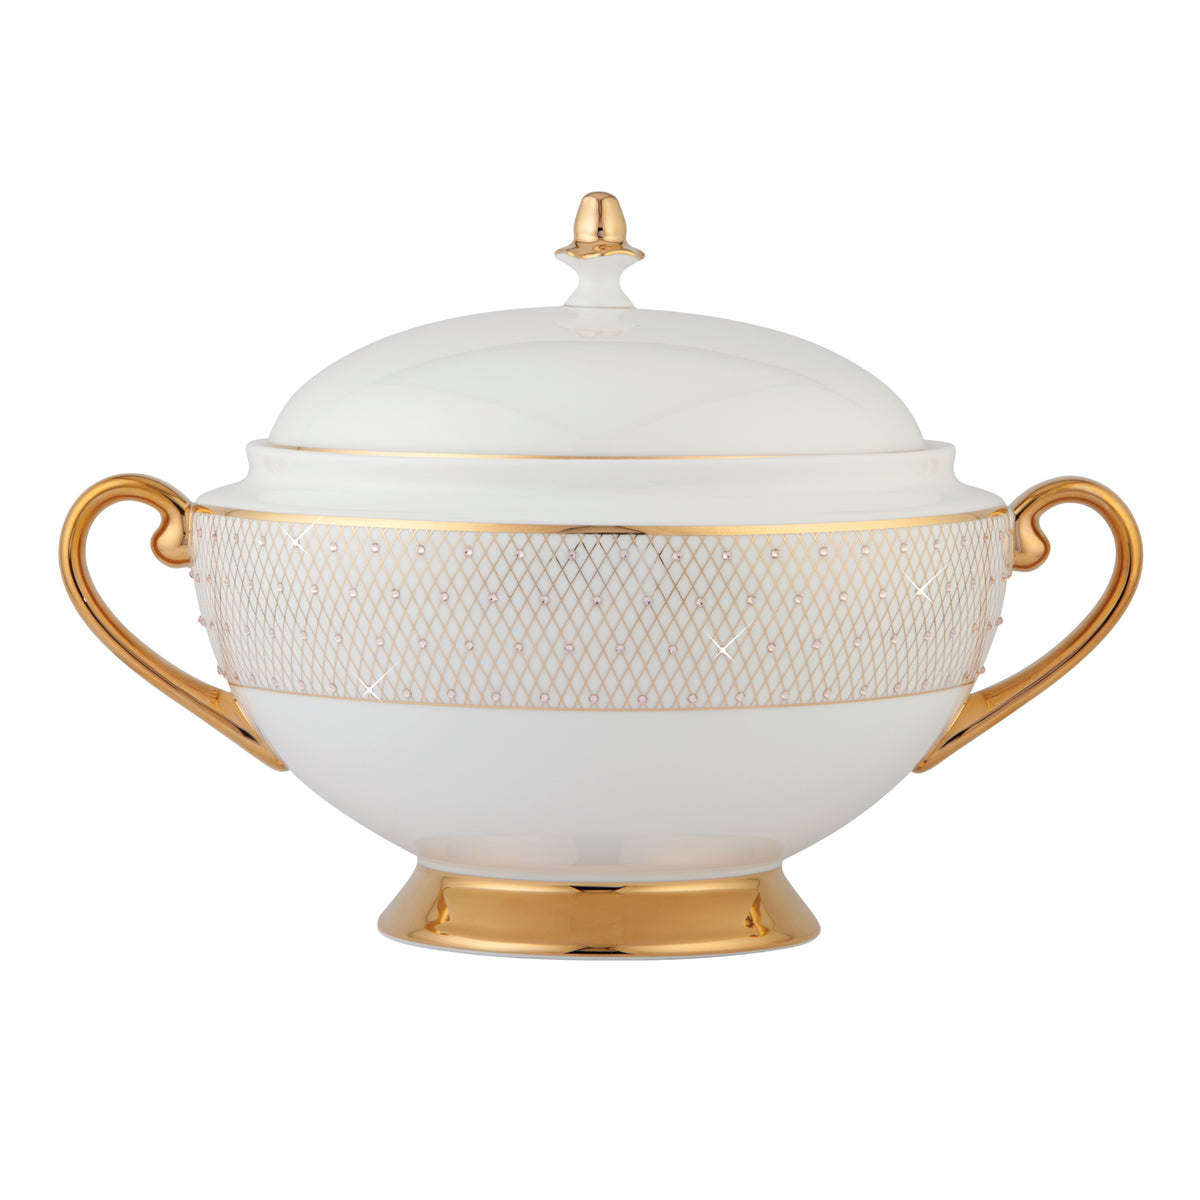 Princess Gold - Covered Vegetable Bowl / Soup Tureen